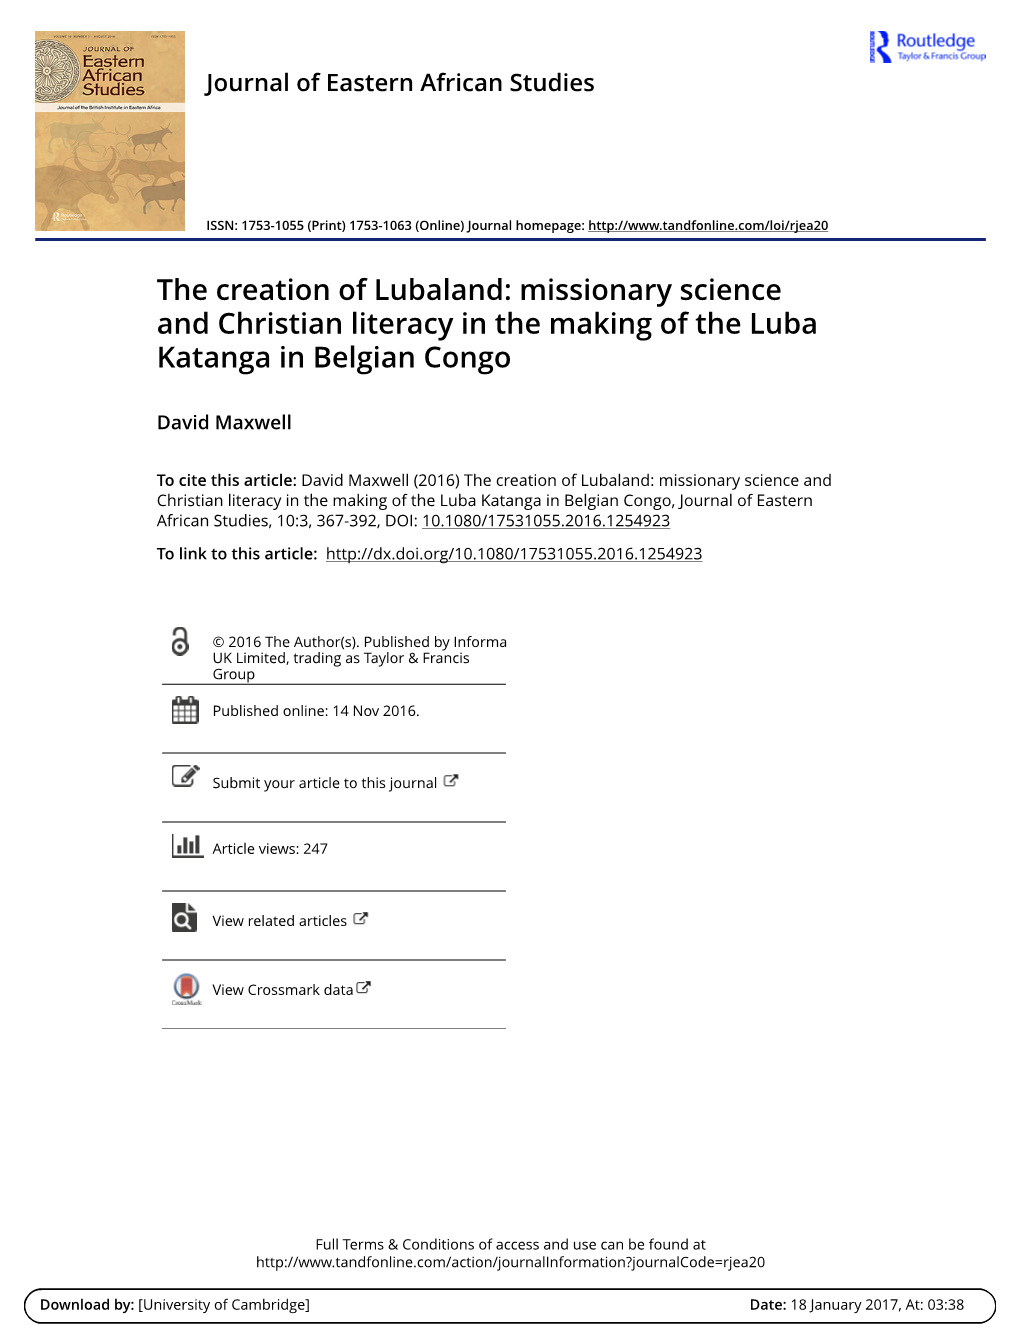 Missionary Science and Christian Literacy in the Making of the Luba Katanga in Belgian Congo